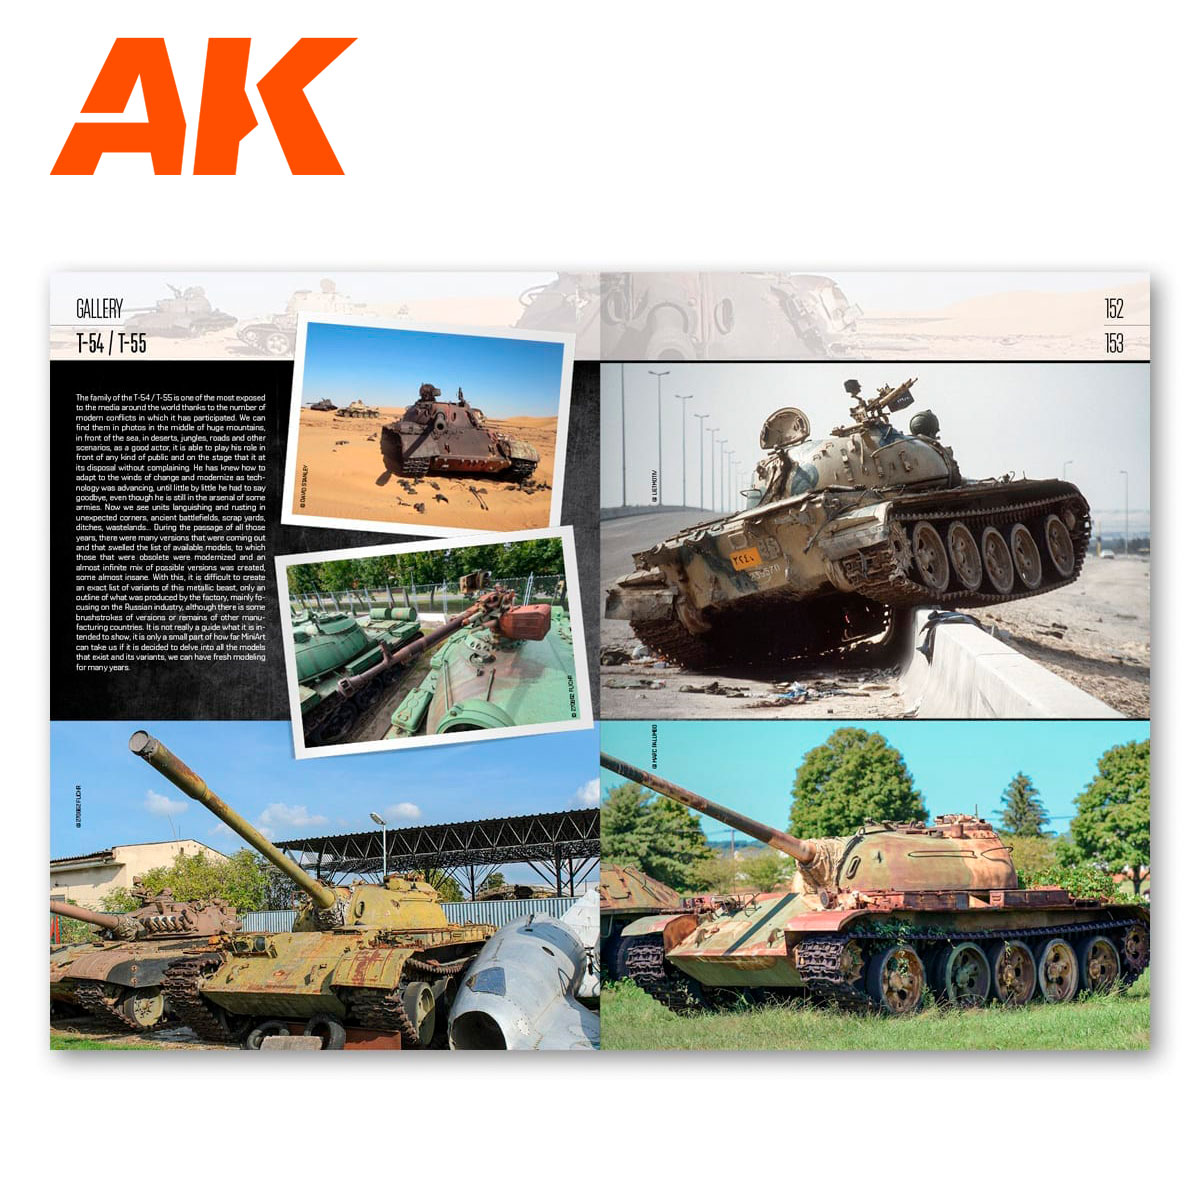 Buy Modeling T54 - T55 MiniArt online for 27,96€ | AK-Interactive